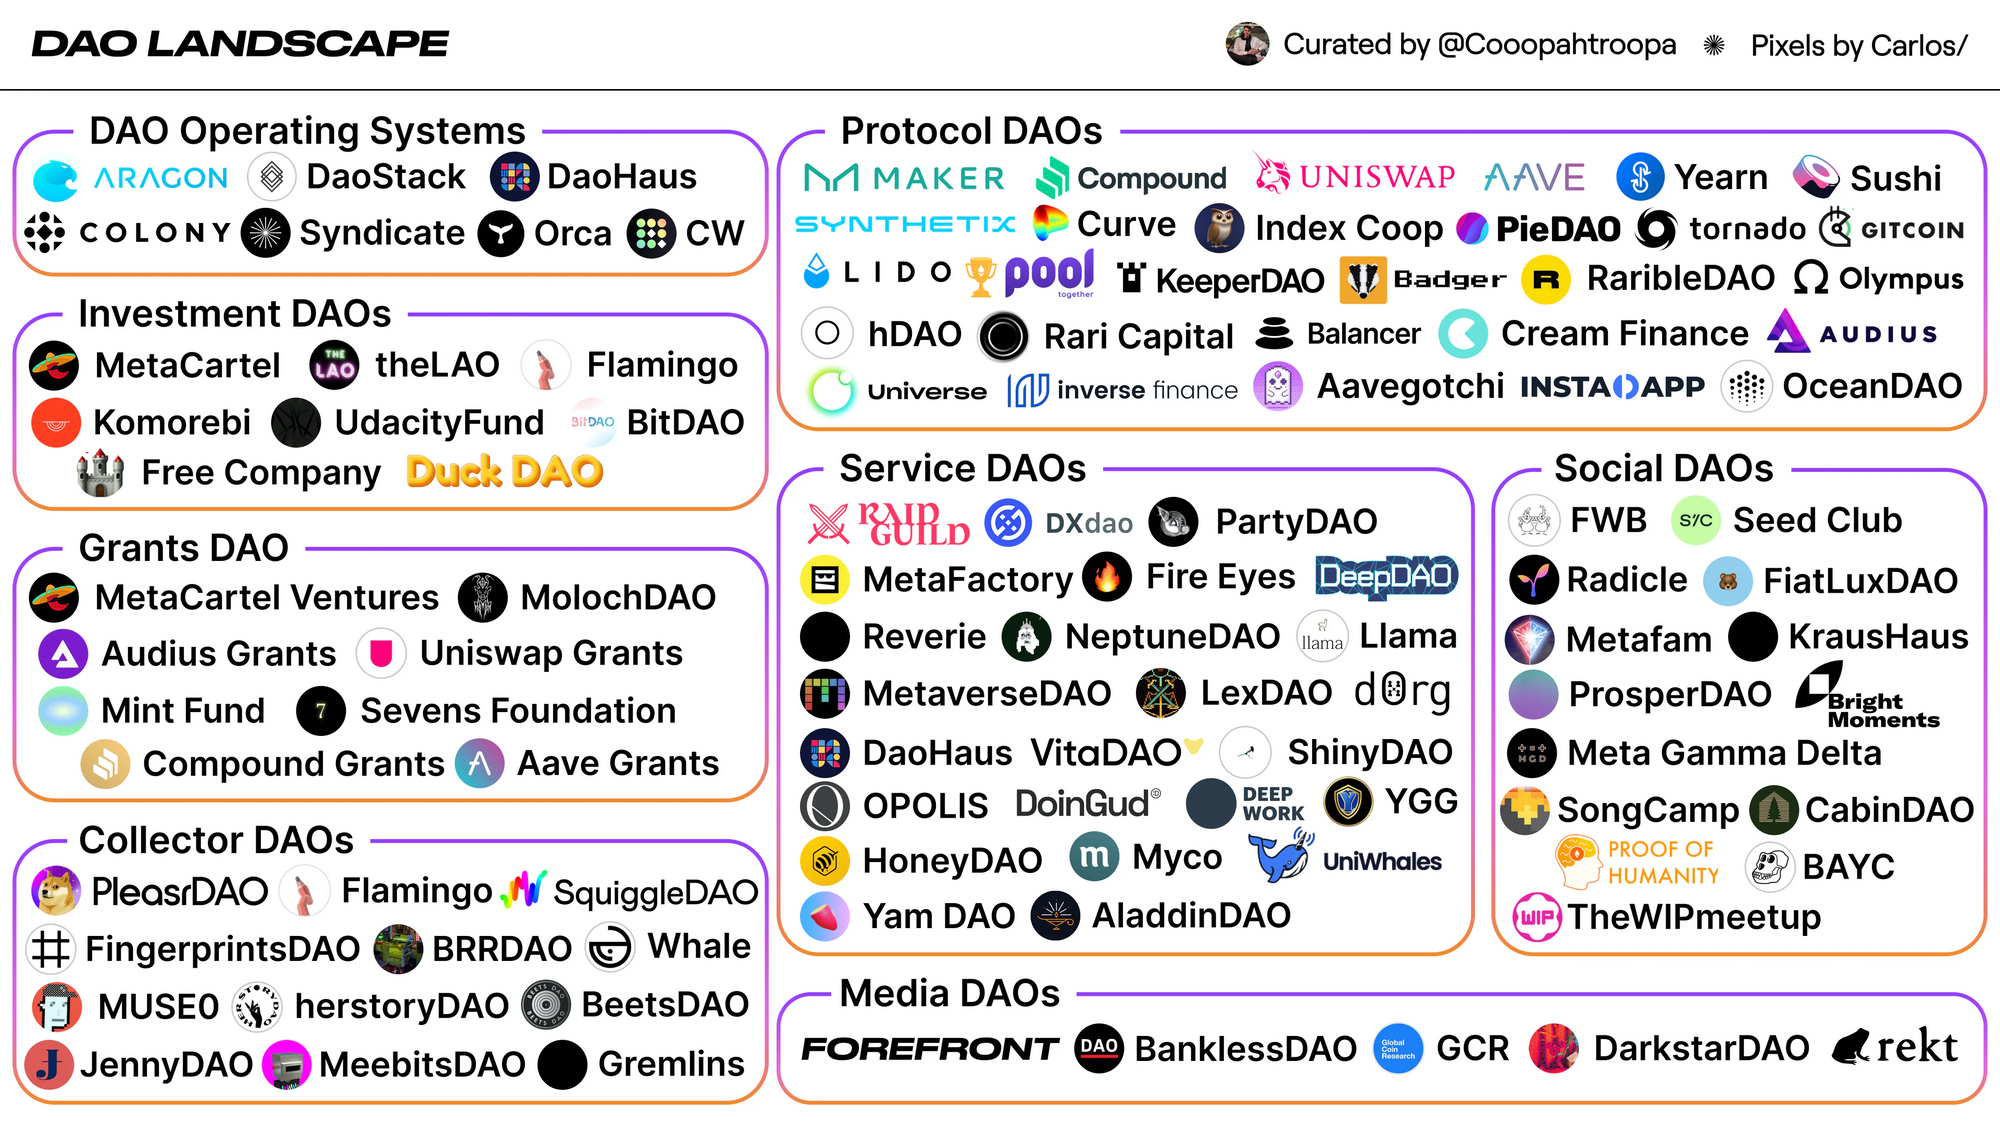 Some prominent DAOs in the Ethereum ecosystem